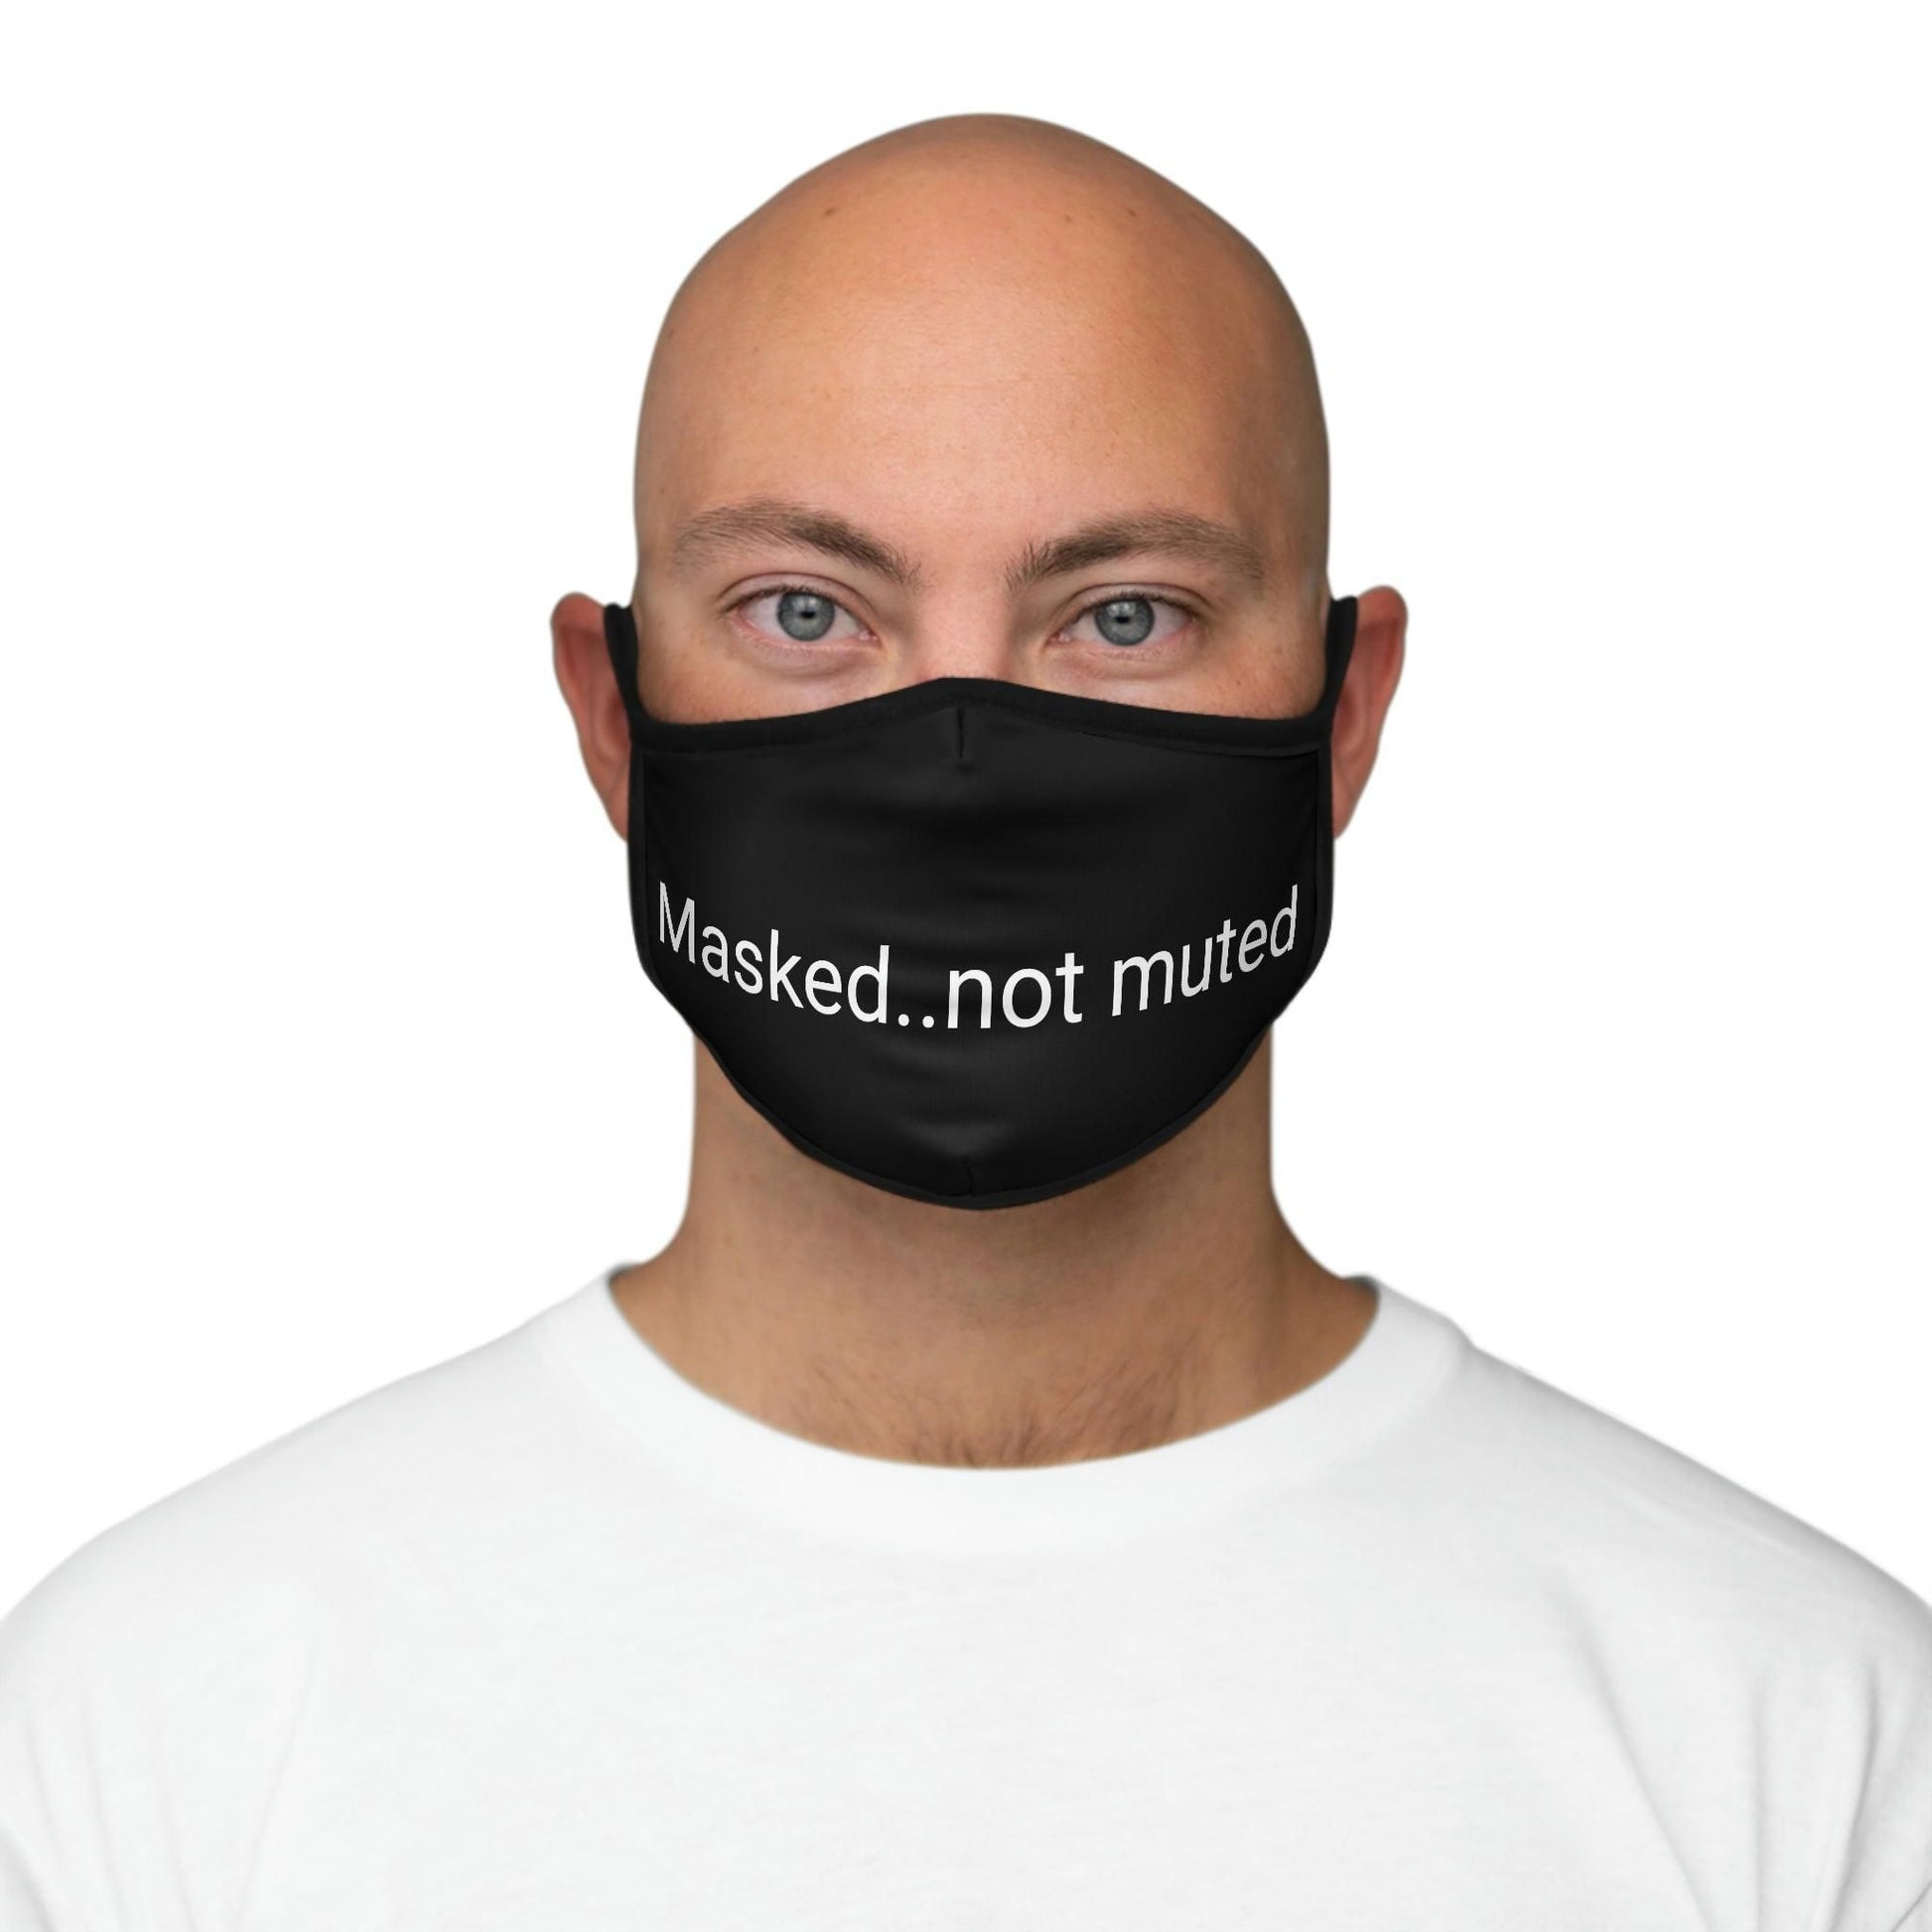 Black Fitted Face Mask with expression - Masked Not Muted - USA - e-mandi